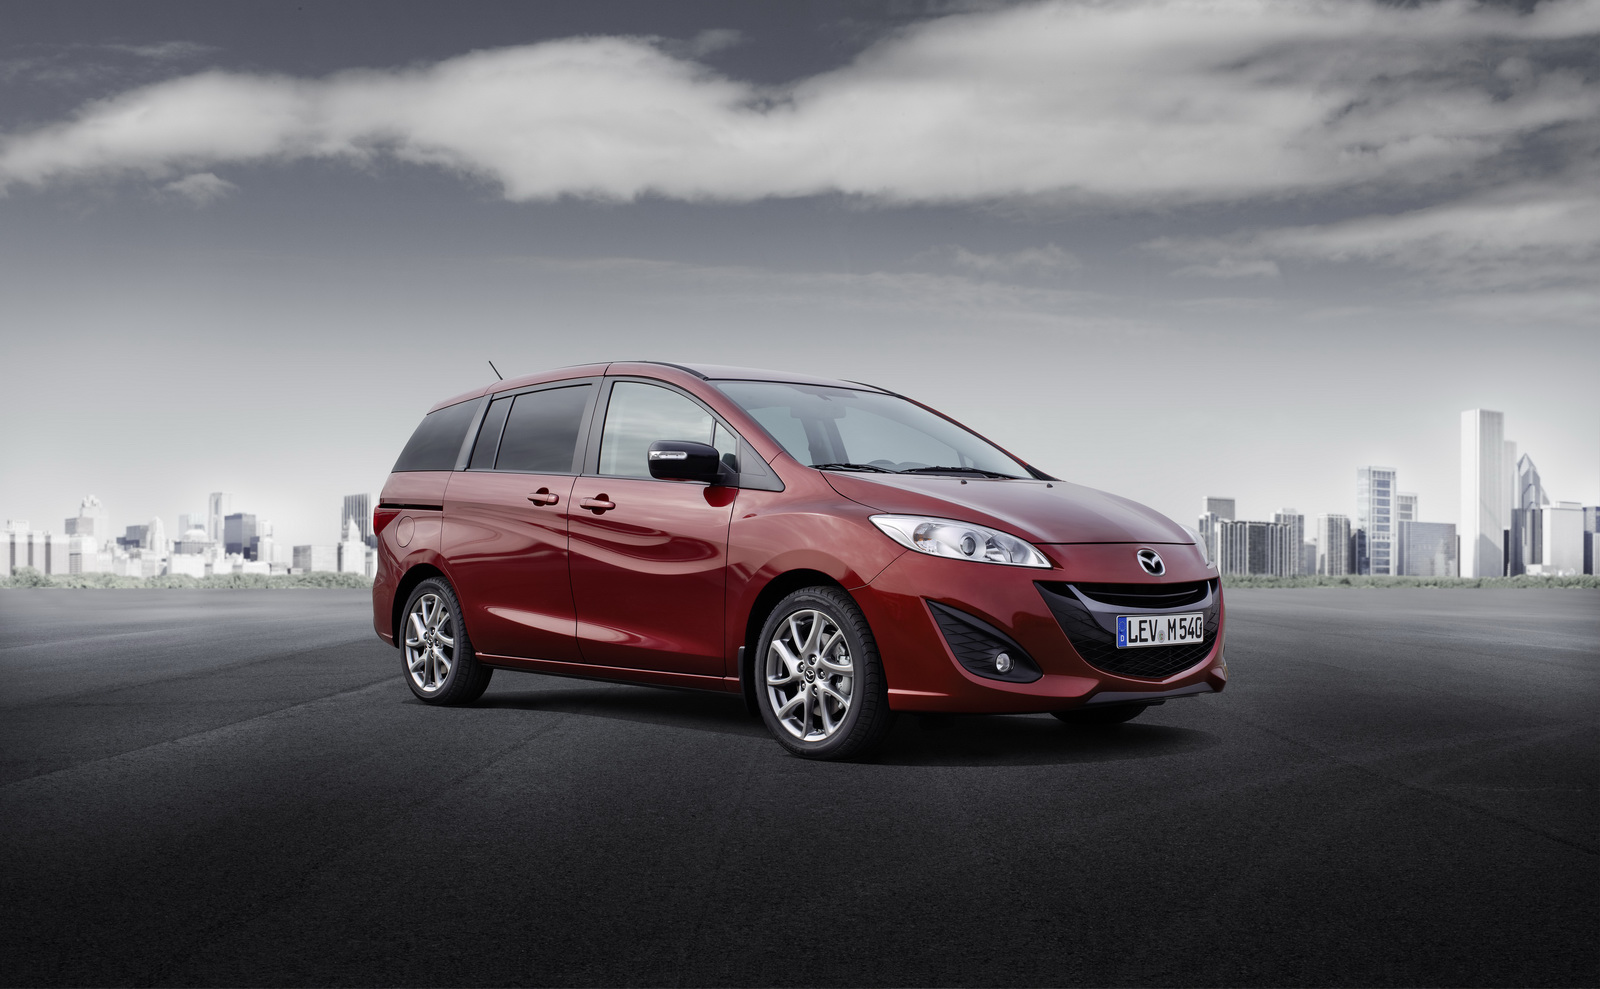 Mazda5 Won't Get a Replacement, But Does Anyone Really Care